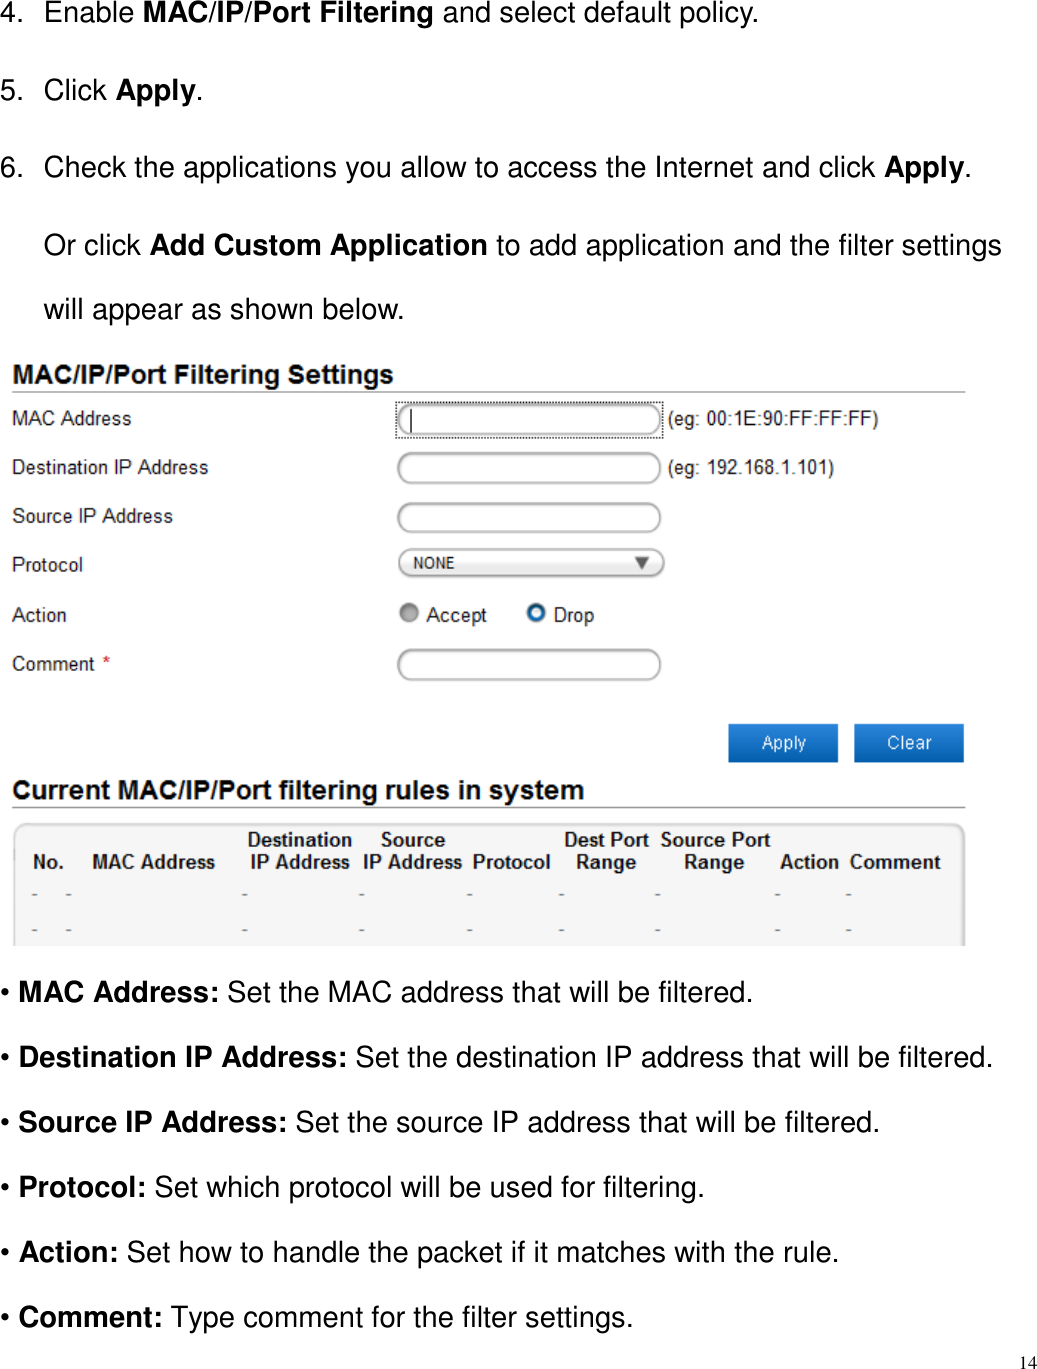 14  4. Enable MAC/IP/Port Filtering and select default policy. 5.  Click Apply. 6.  Check the applications you allow to access the Internet and click Apply. Or click Add Custom Application to add application and the filter settings will appear as shown below.    • MAC Address: Set the MAC address that will be filtered. • Destination IP Address: Set the destination IP address that will be filtered. • Source IP Address: Set the source IP address that will be filtered. • Protocol: Set which protocol will be used for filtering. • Action: Set how to handle the packet if it matches with the rule. • Comment: Type comment for the filter settings. 